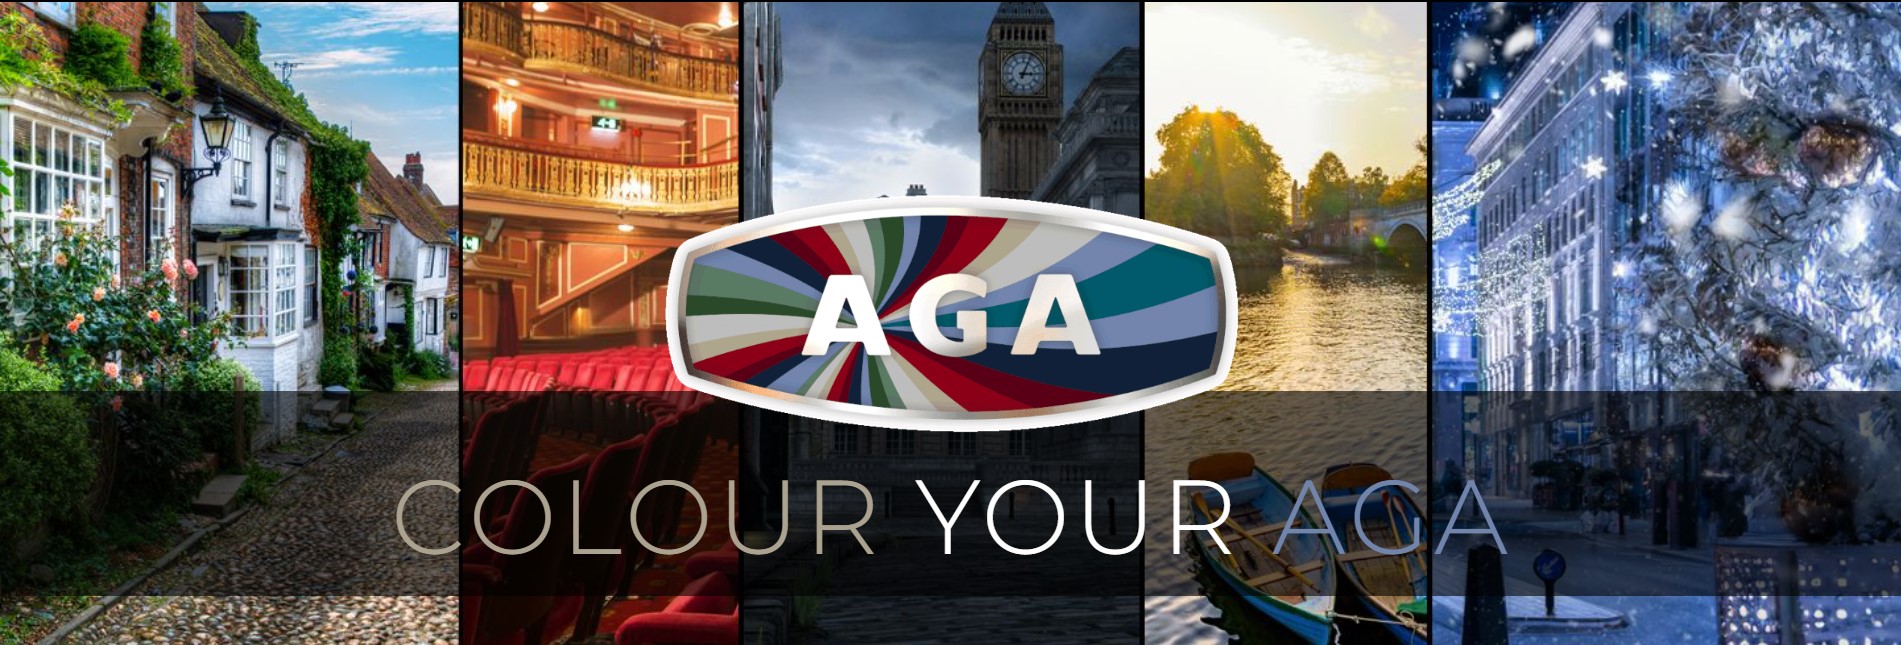 Introducing New Colour Collections for AGA Ranges!